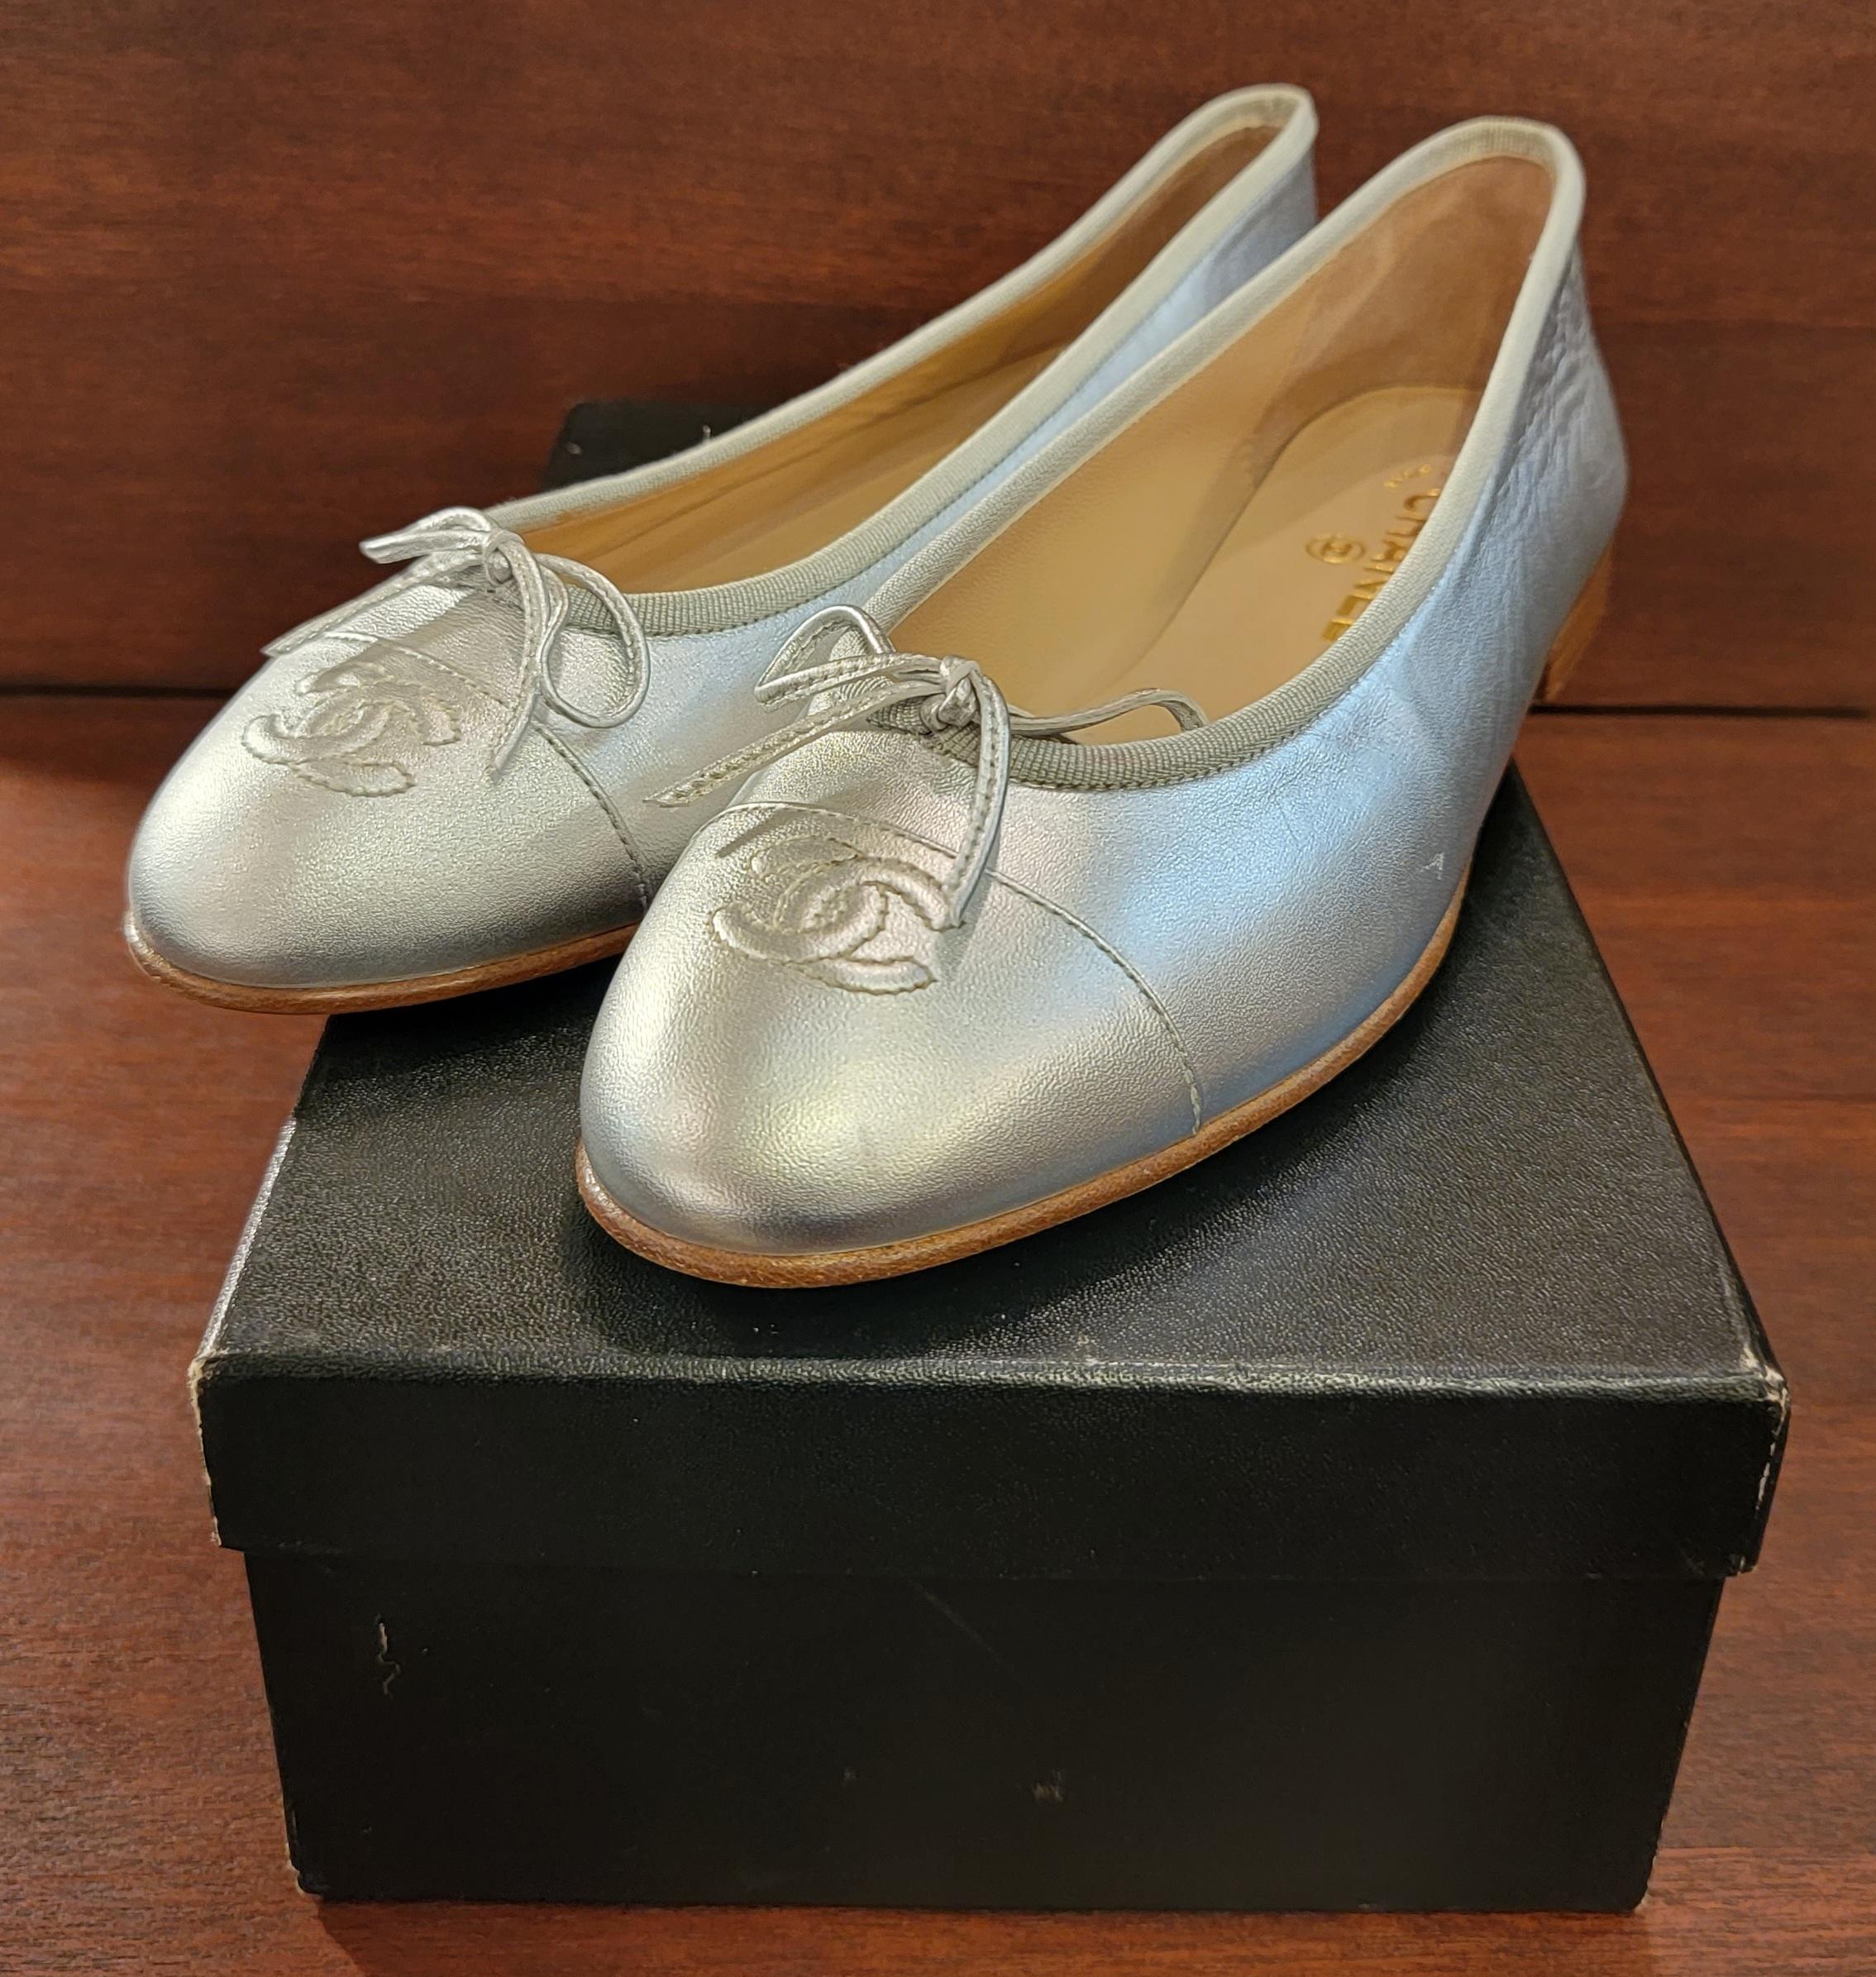 Rare Brand New Chanel Ballerina Size 39 Metalic Silver Shoes For Sale 2